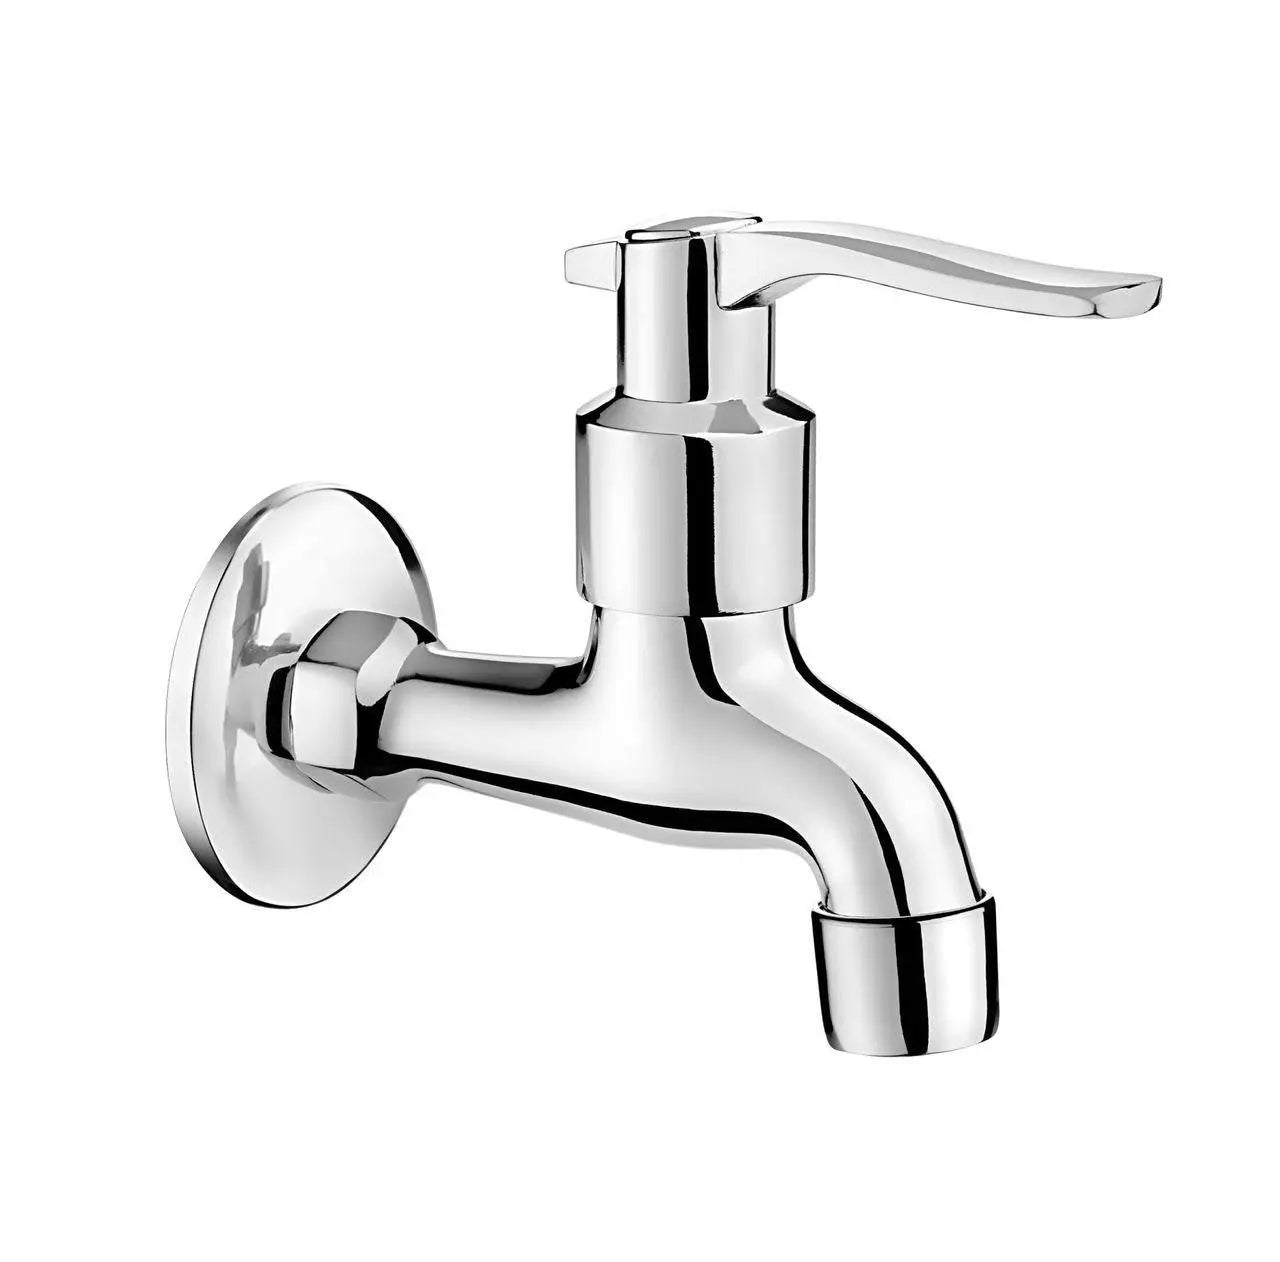 1/2 Inch Water Garden Outdoor Tap Chrome Plated with Aerator Garden Taps / Valves